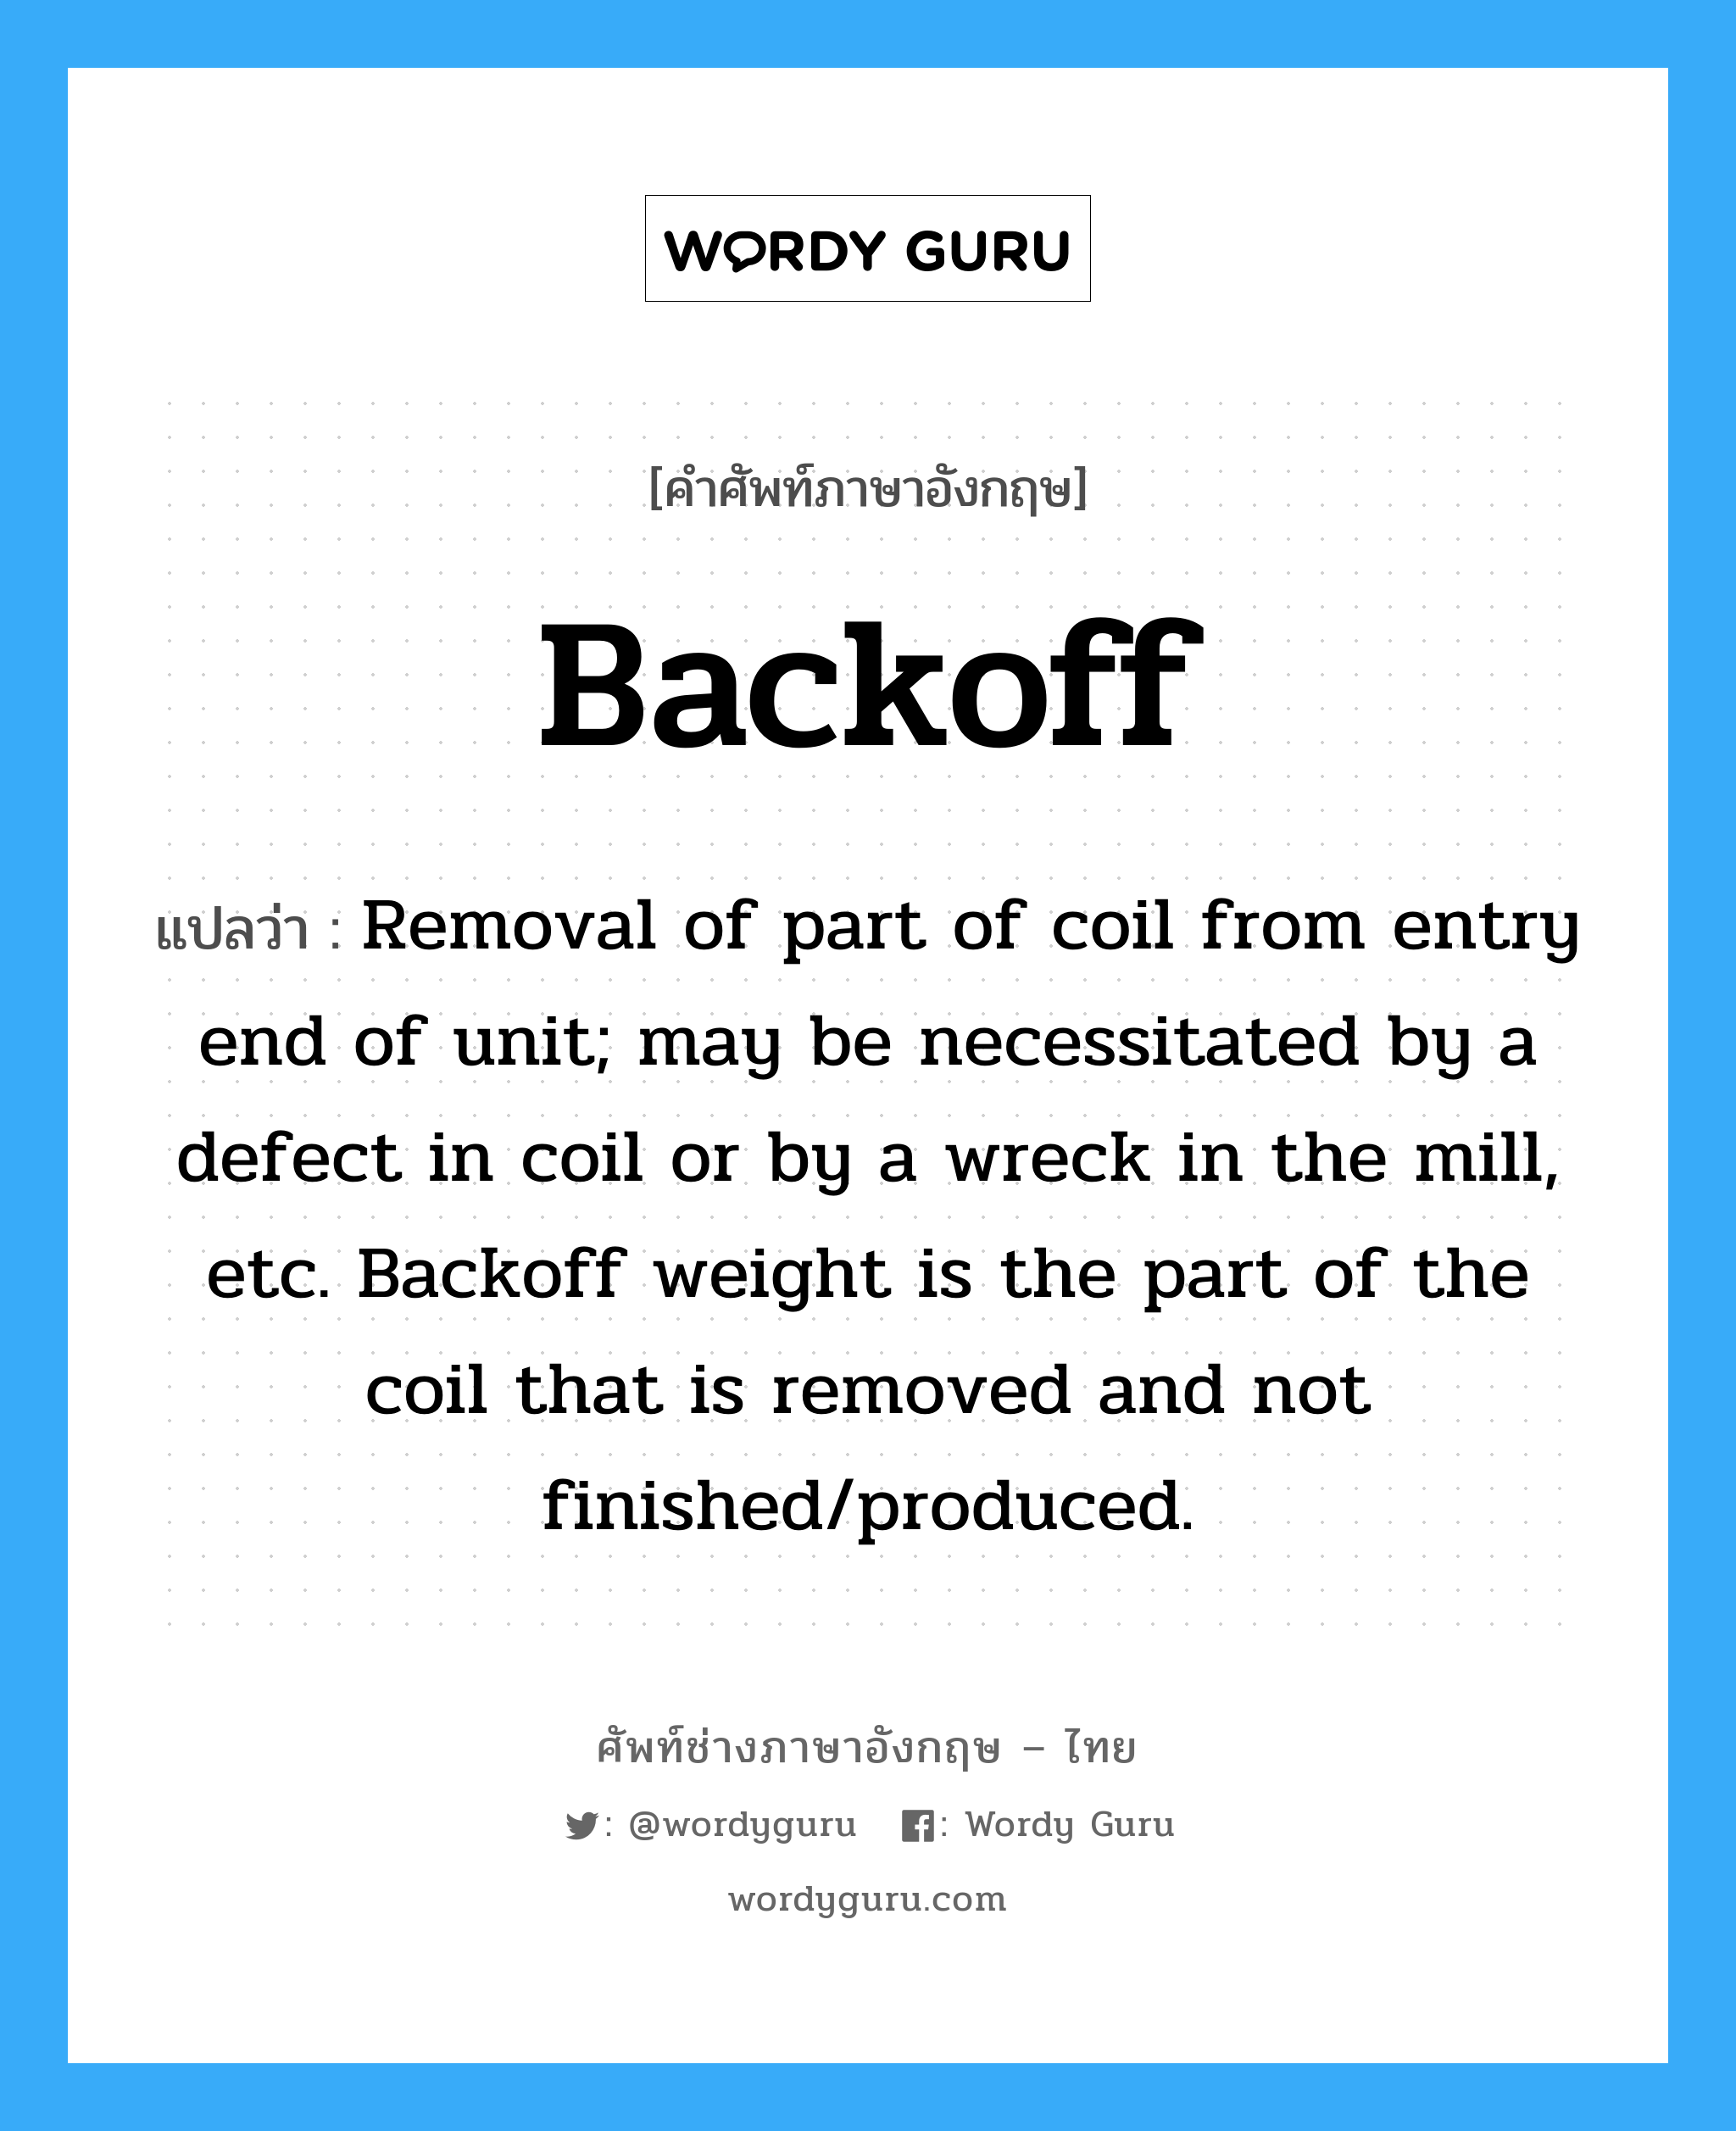 Removal of part of coil from entry end of unit; may be necessitated by a defect in coil or by a wreck in the mill, etc. Backoff weight is the part of the coil that is removed and not finished/produced. ภาษาอังกฤษ?, คำศัพท์ช่างภาษาอังกฤษ - ไทย Removal of part of coil from entry end of unit; may be necessitated by a defect in coil or by a wreck in the mill, etc. Backoff weight is the part of the coil that is removed and not finished/produced. คำศัพท์ภาษาอังกฤษ Removal of part of coil from entry end of unit; may be necessitated by a defect in coil or by a wreck in the mill, etc. Backoff weight is the part of the coil that is removed and not finished/produced. แปลว่า Backoff